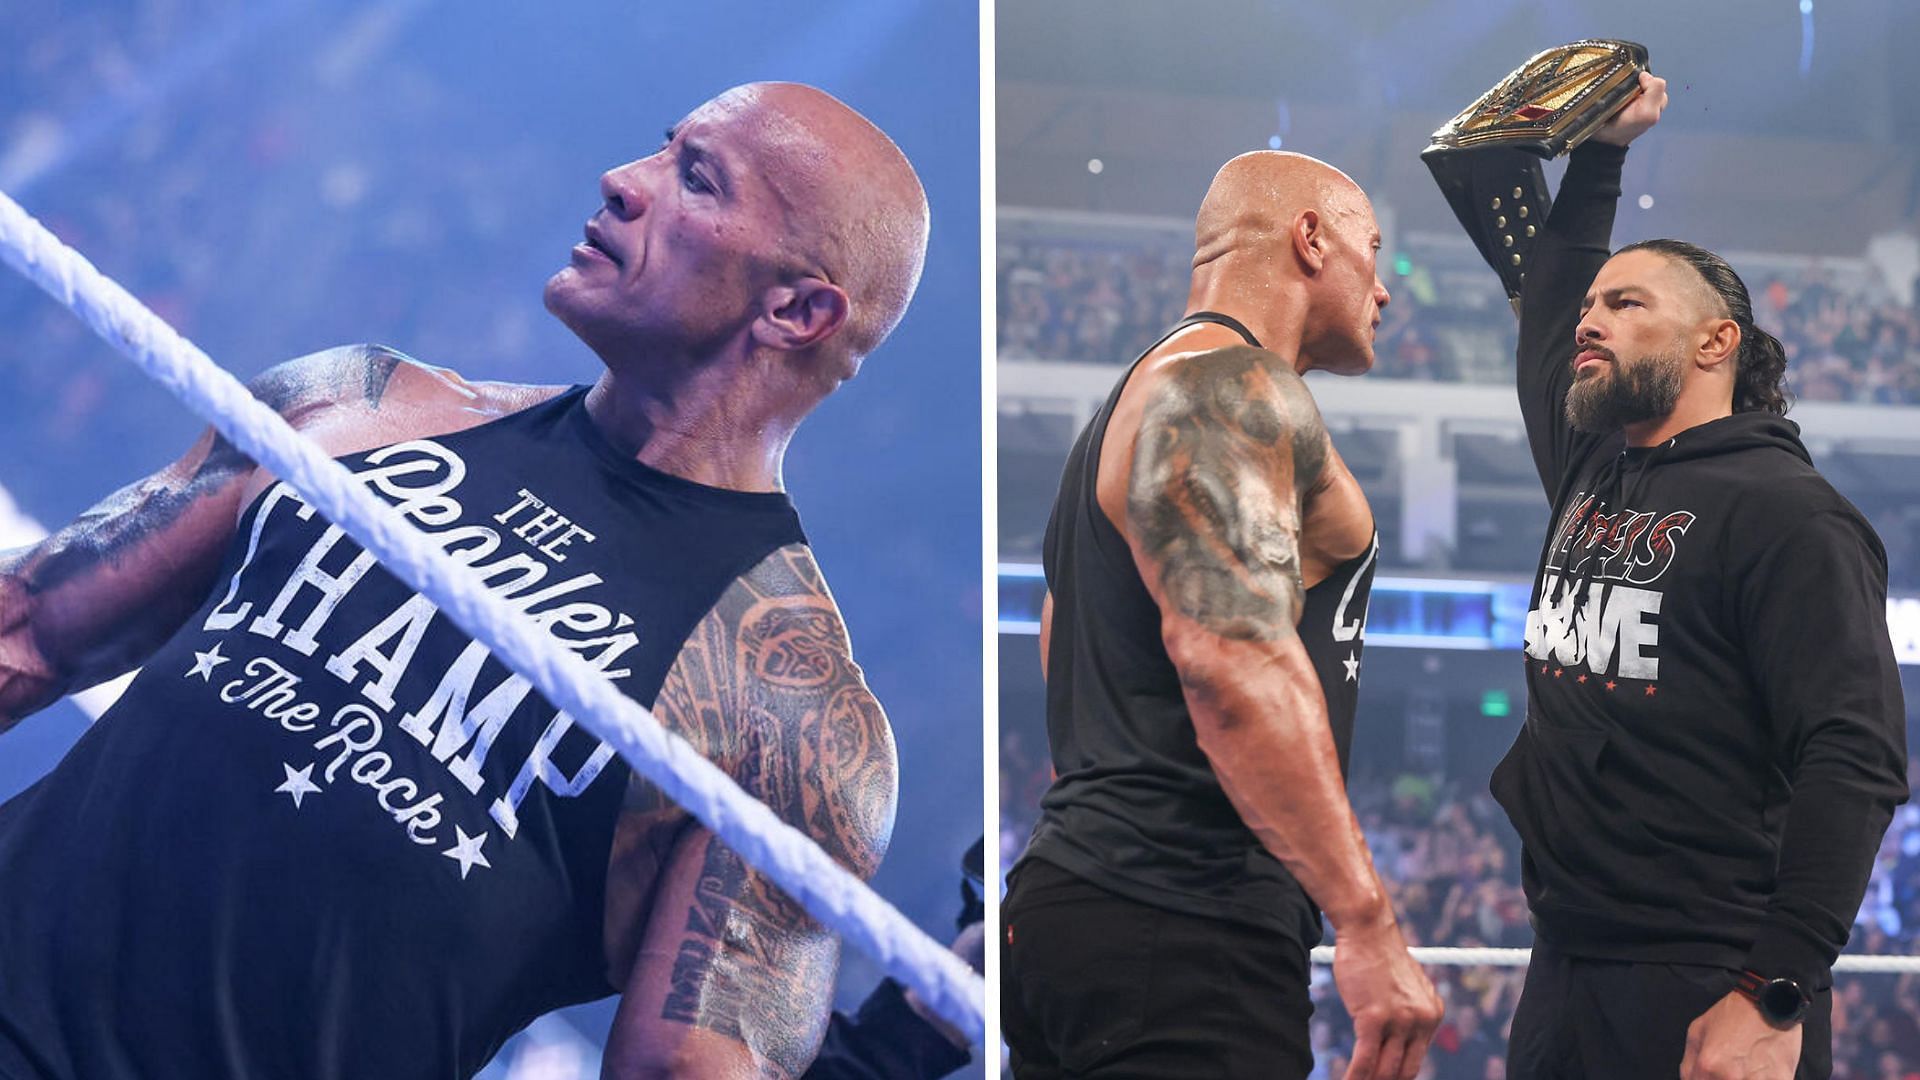 The Rock and Roman Reigns are set to main event WrestleMania XL